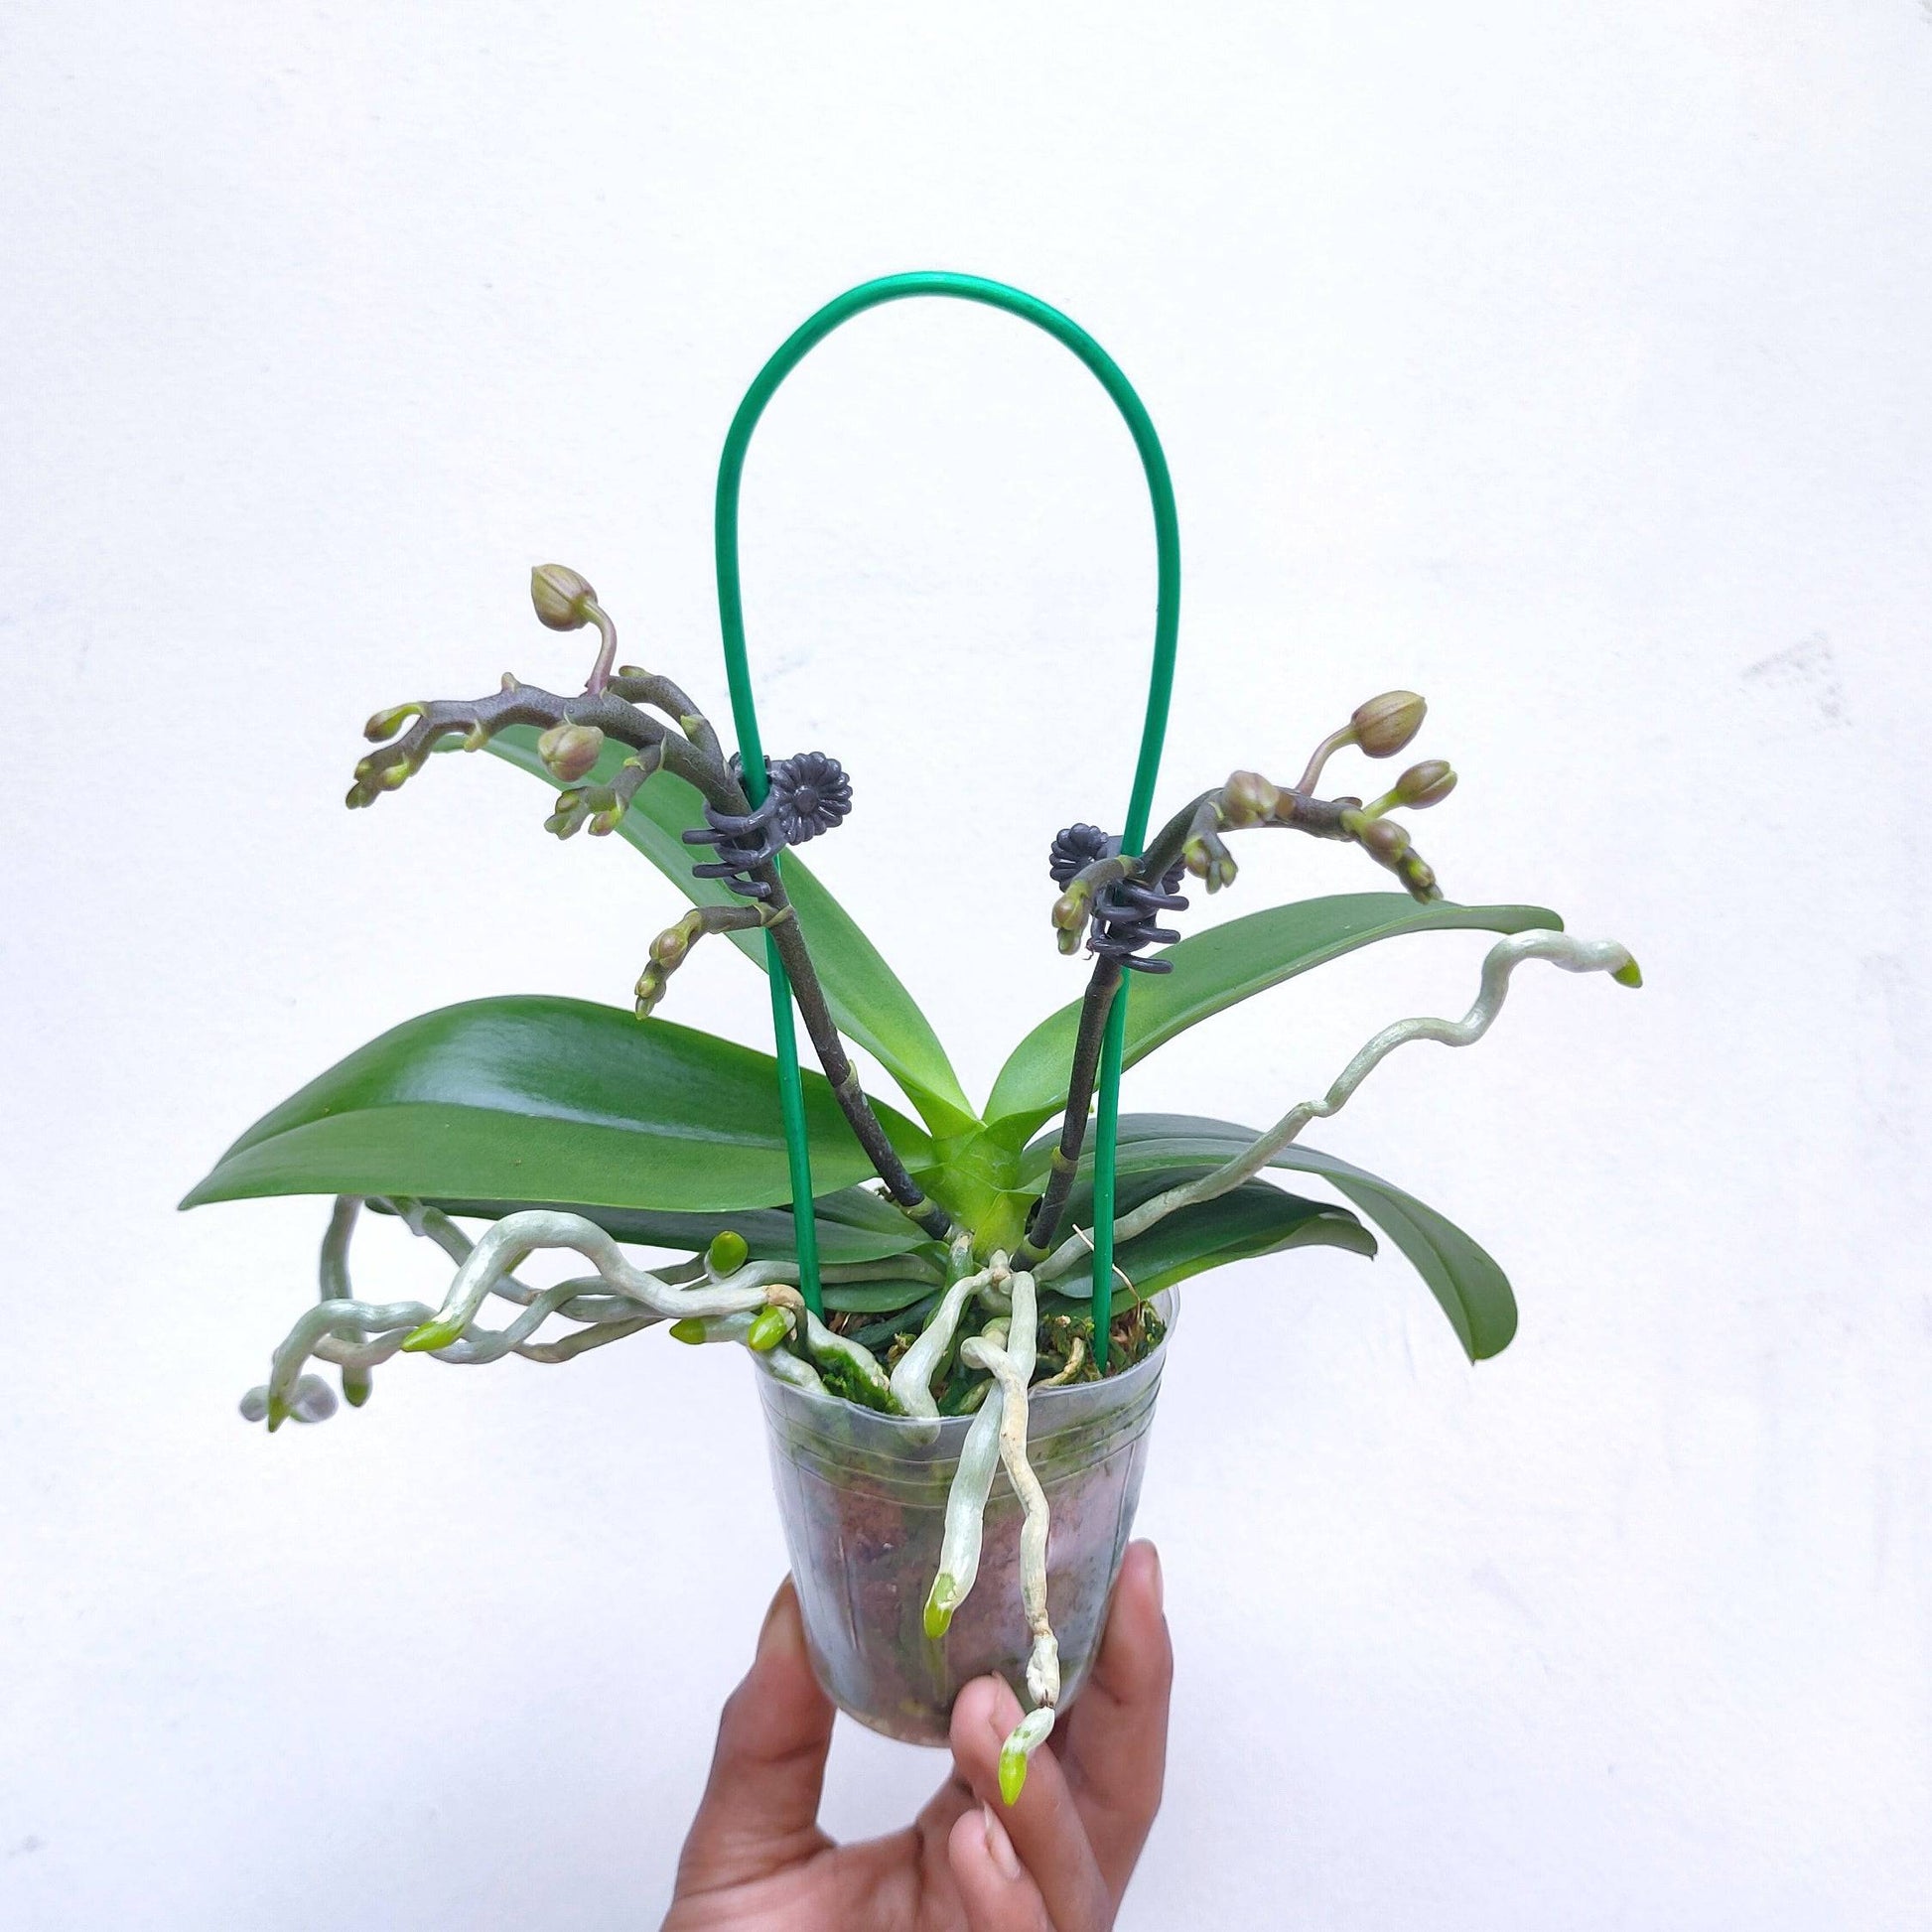 Phalaenopsis Shu Long Cherry - With Buds | FF - Buy Orchids Plants Online by Orchid-Tree.com